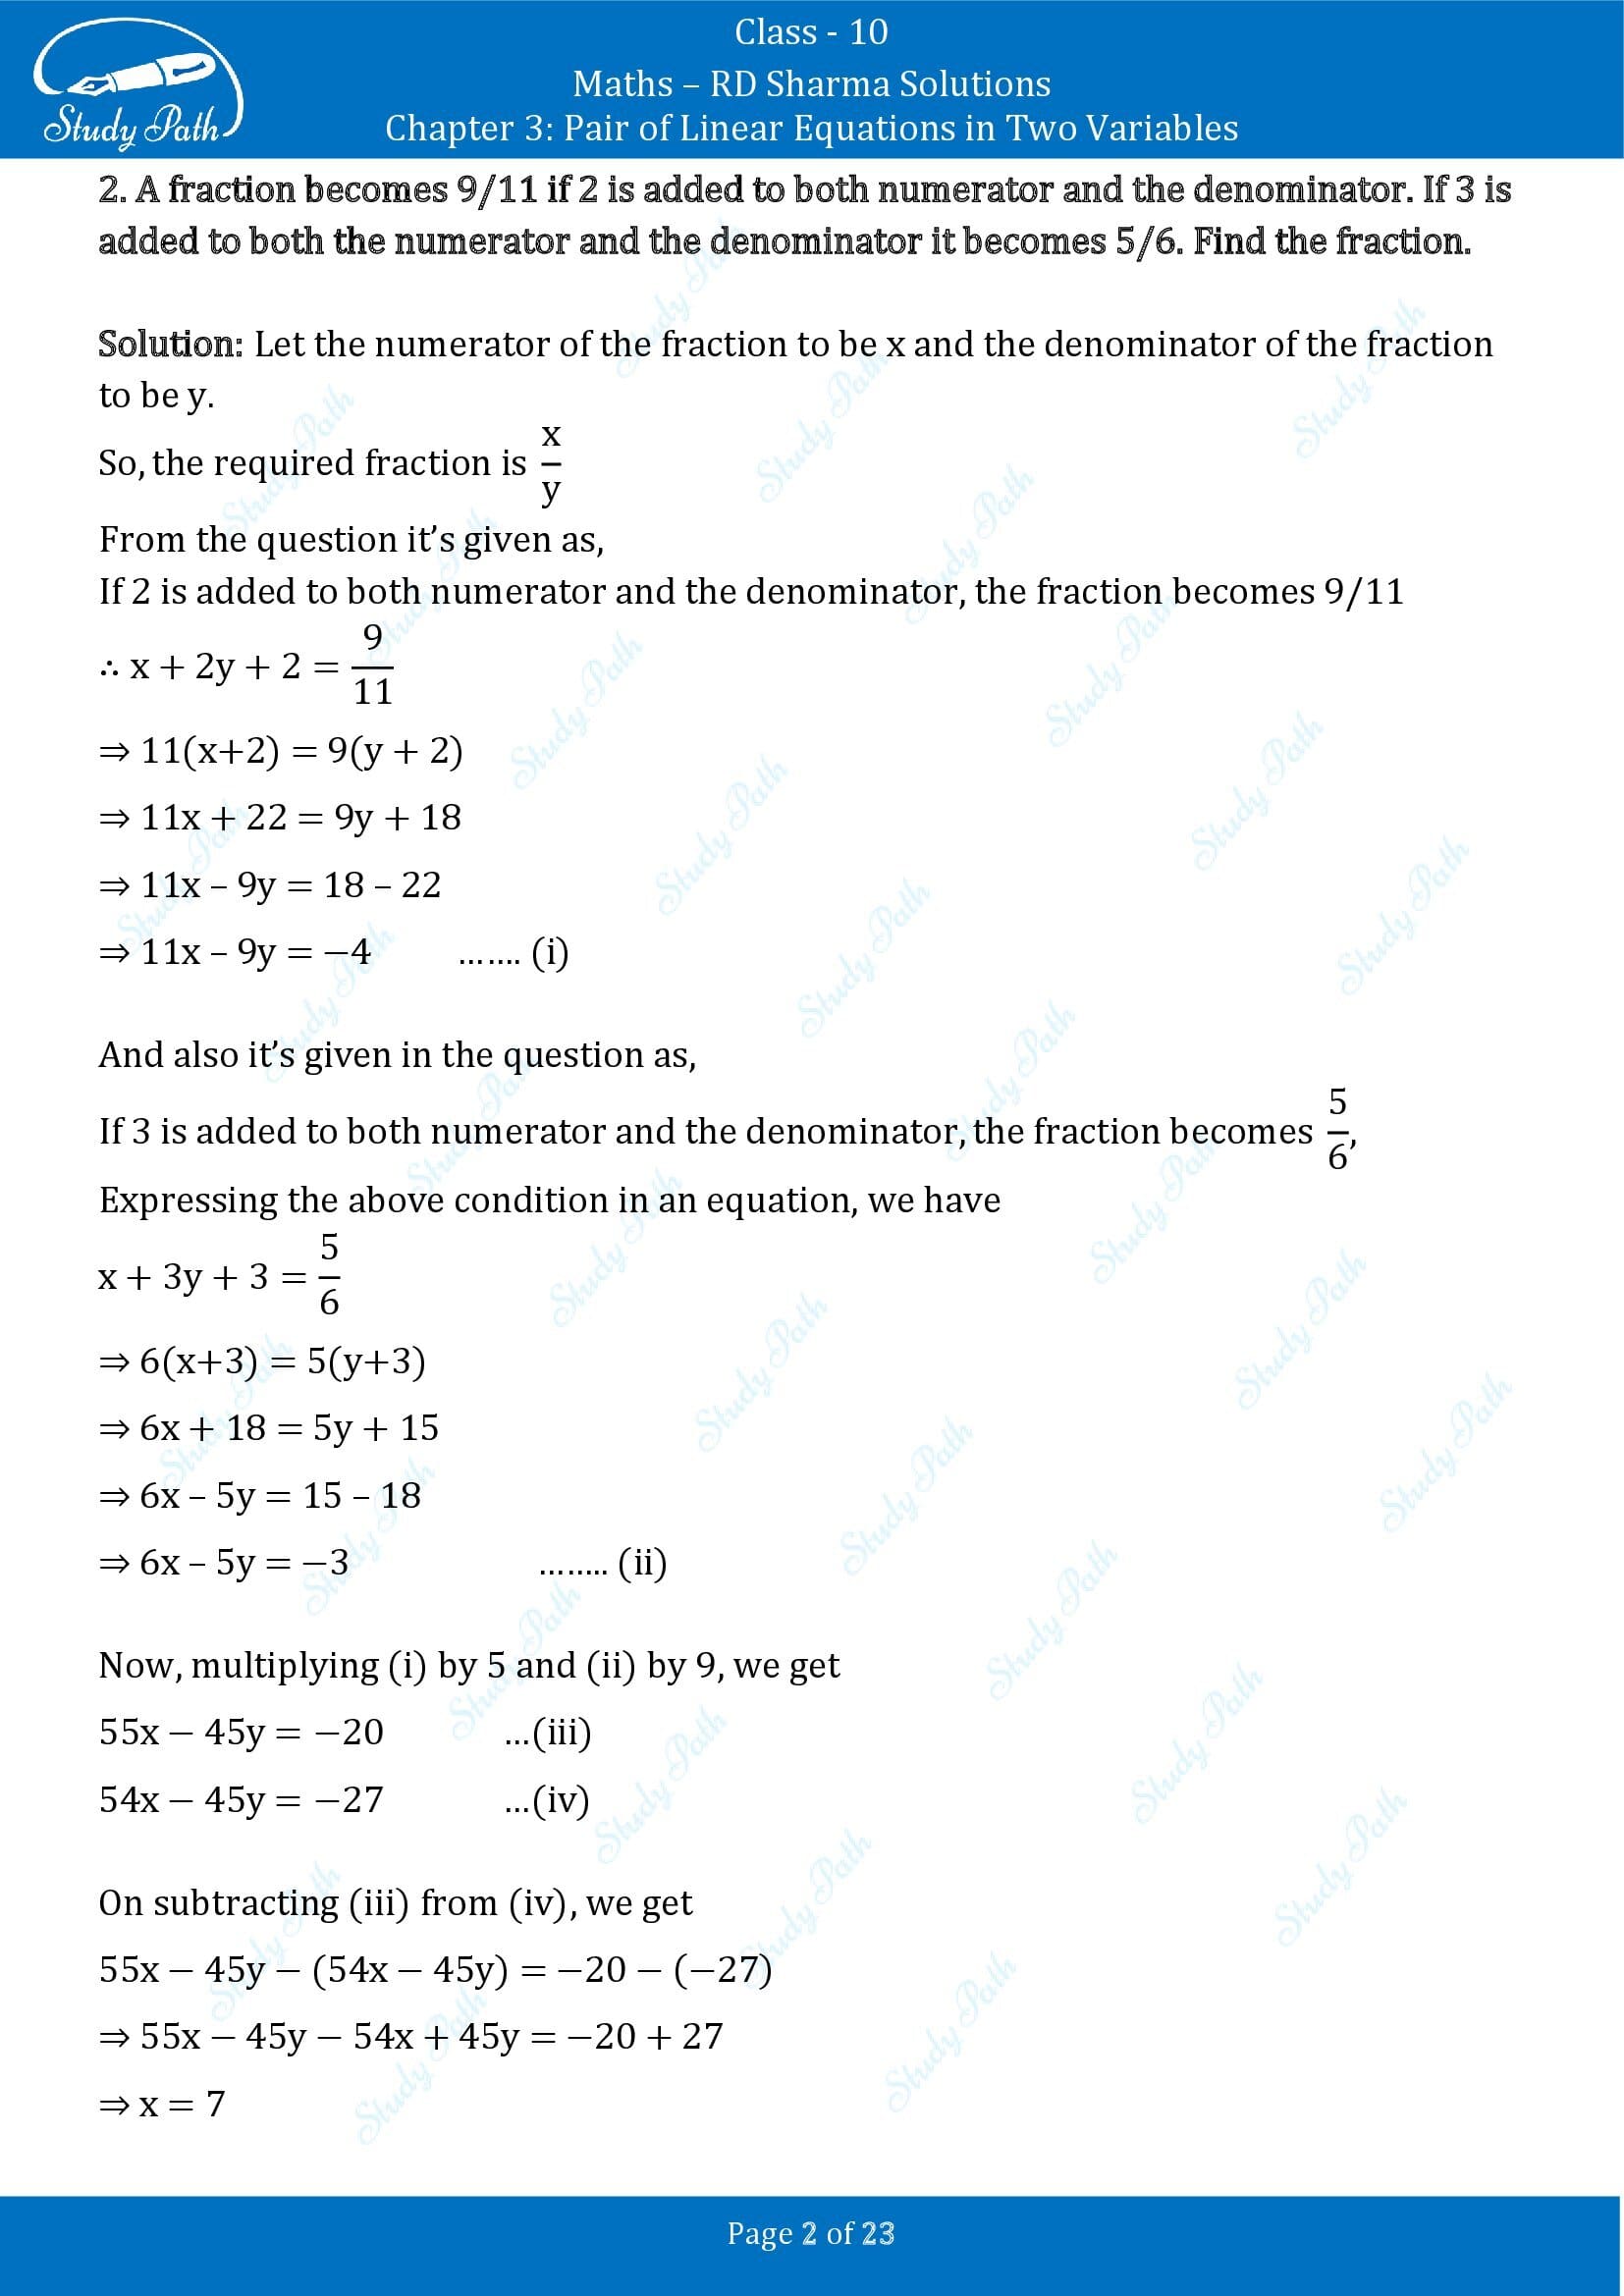 RD Sharma Solutions Class 10 Chapter 3 Pair of Linear Equations in Two Variables Exercise 3.8 00002